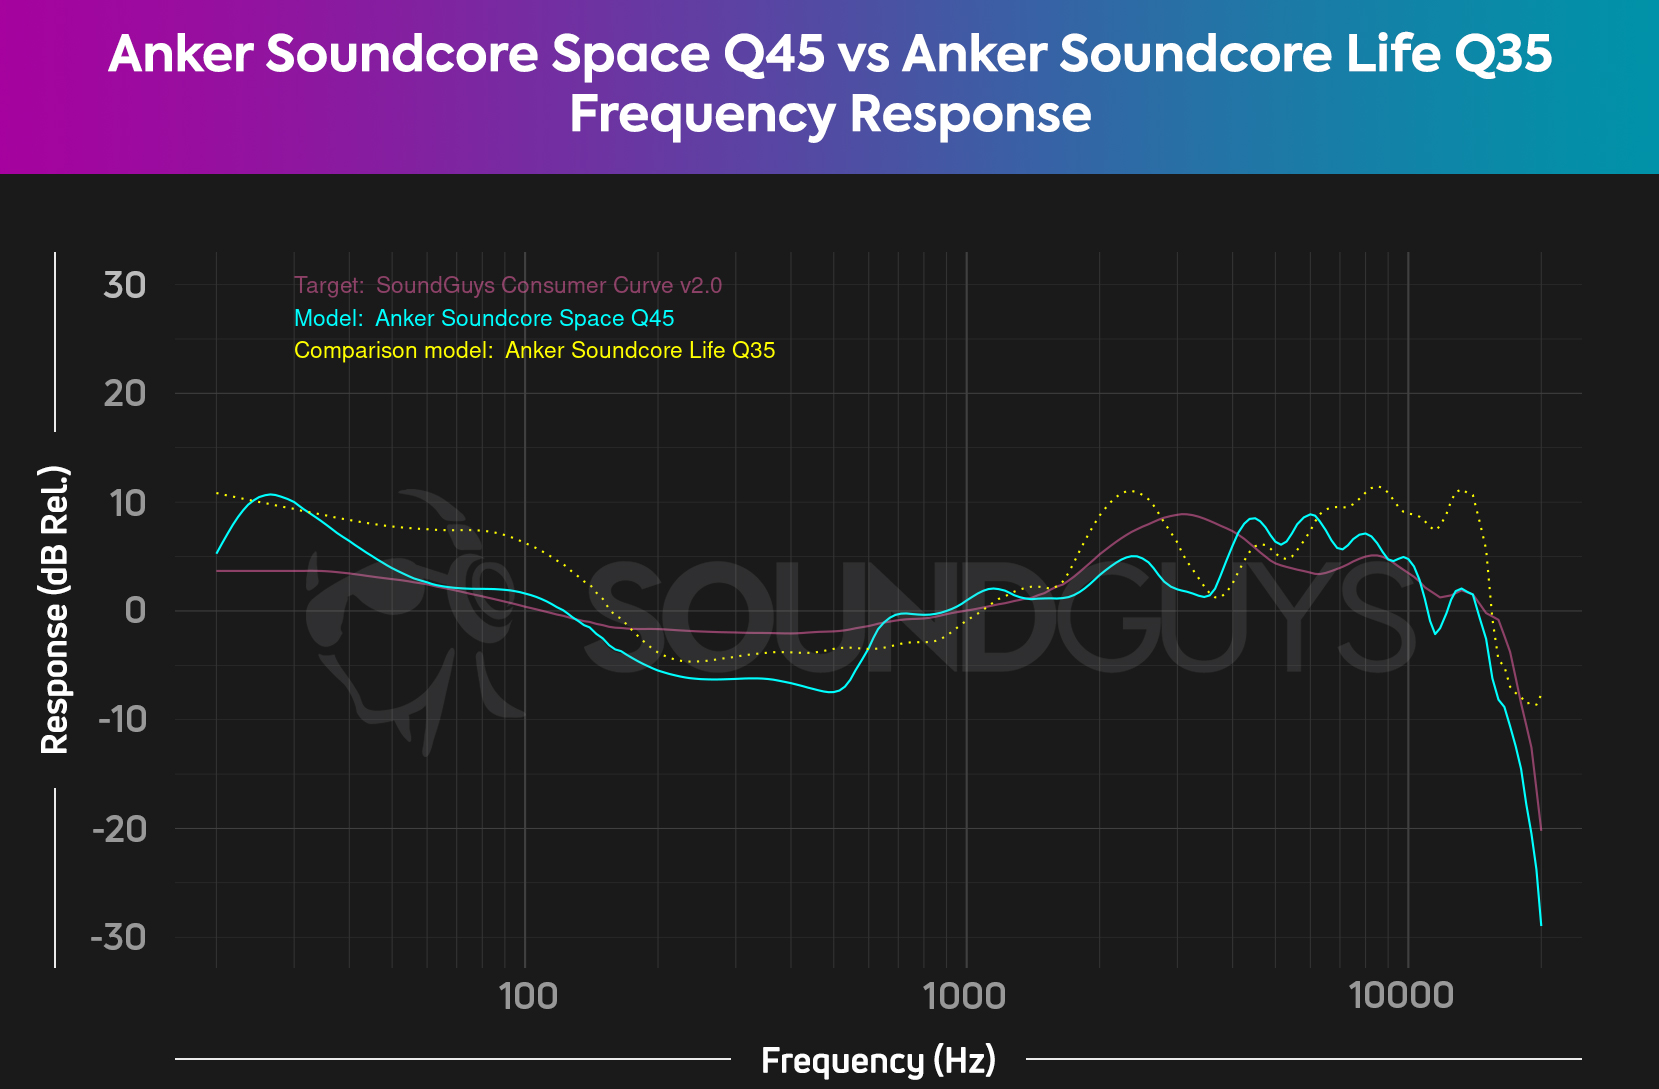 A chart compares the Anker Soundcore Space Q45 frequency response to the Souundcore Life Q35, showing the Q45 hews closer to the SoundGuys target.